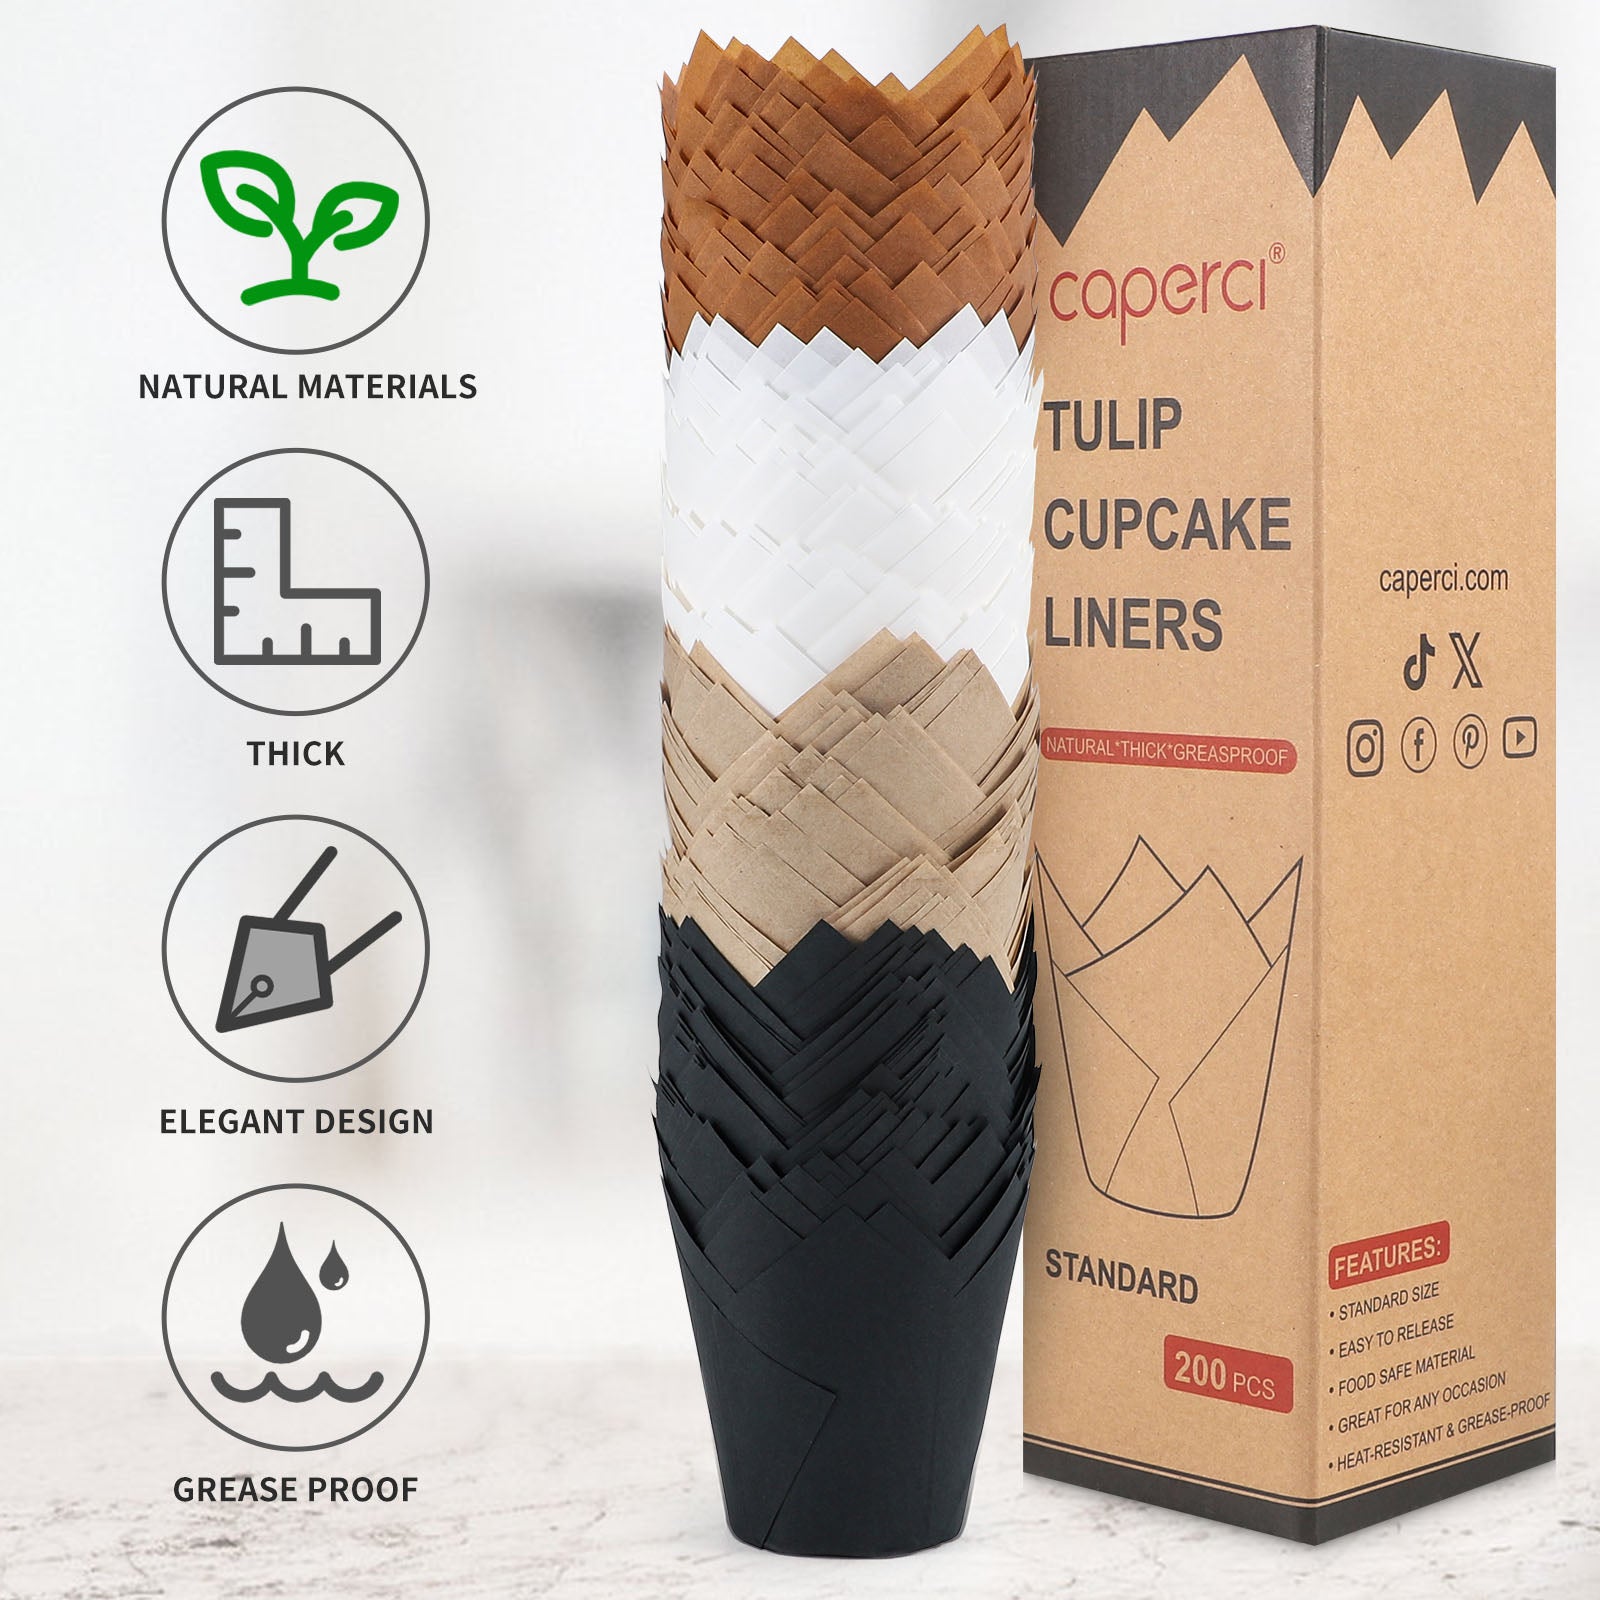 Caperci Standard Tulip Cupcake Liners for Baking 200 Counts - Greaseproof Muffin Baking Cups for Wedding Birthday Party Baby Shower Festivals Christmas (Natural/White/Brown/Black)